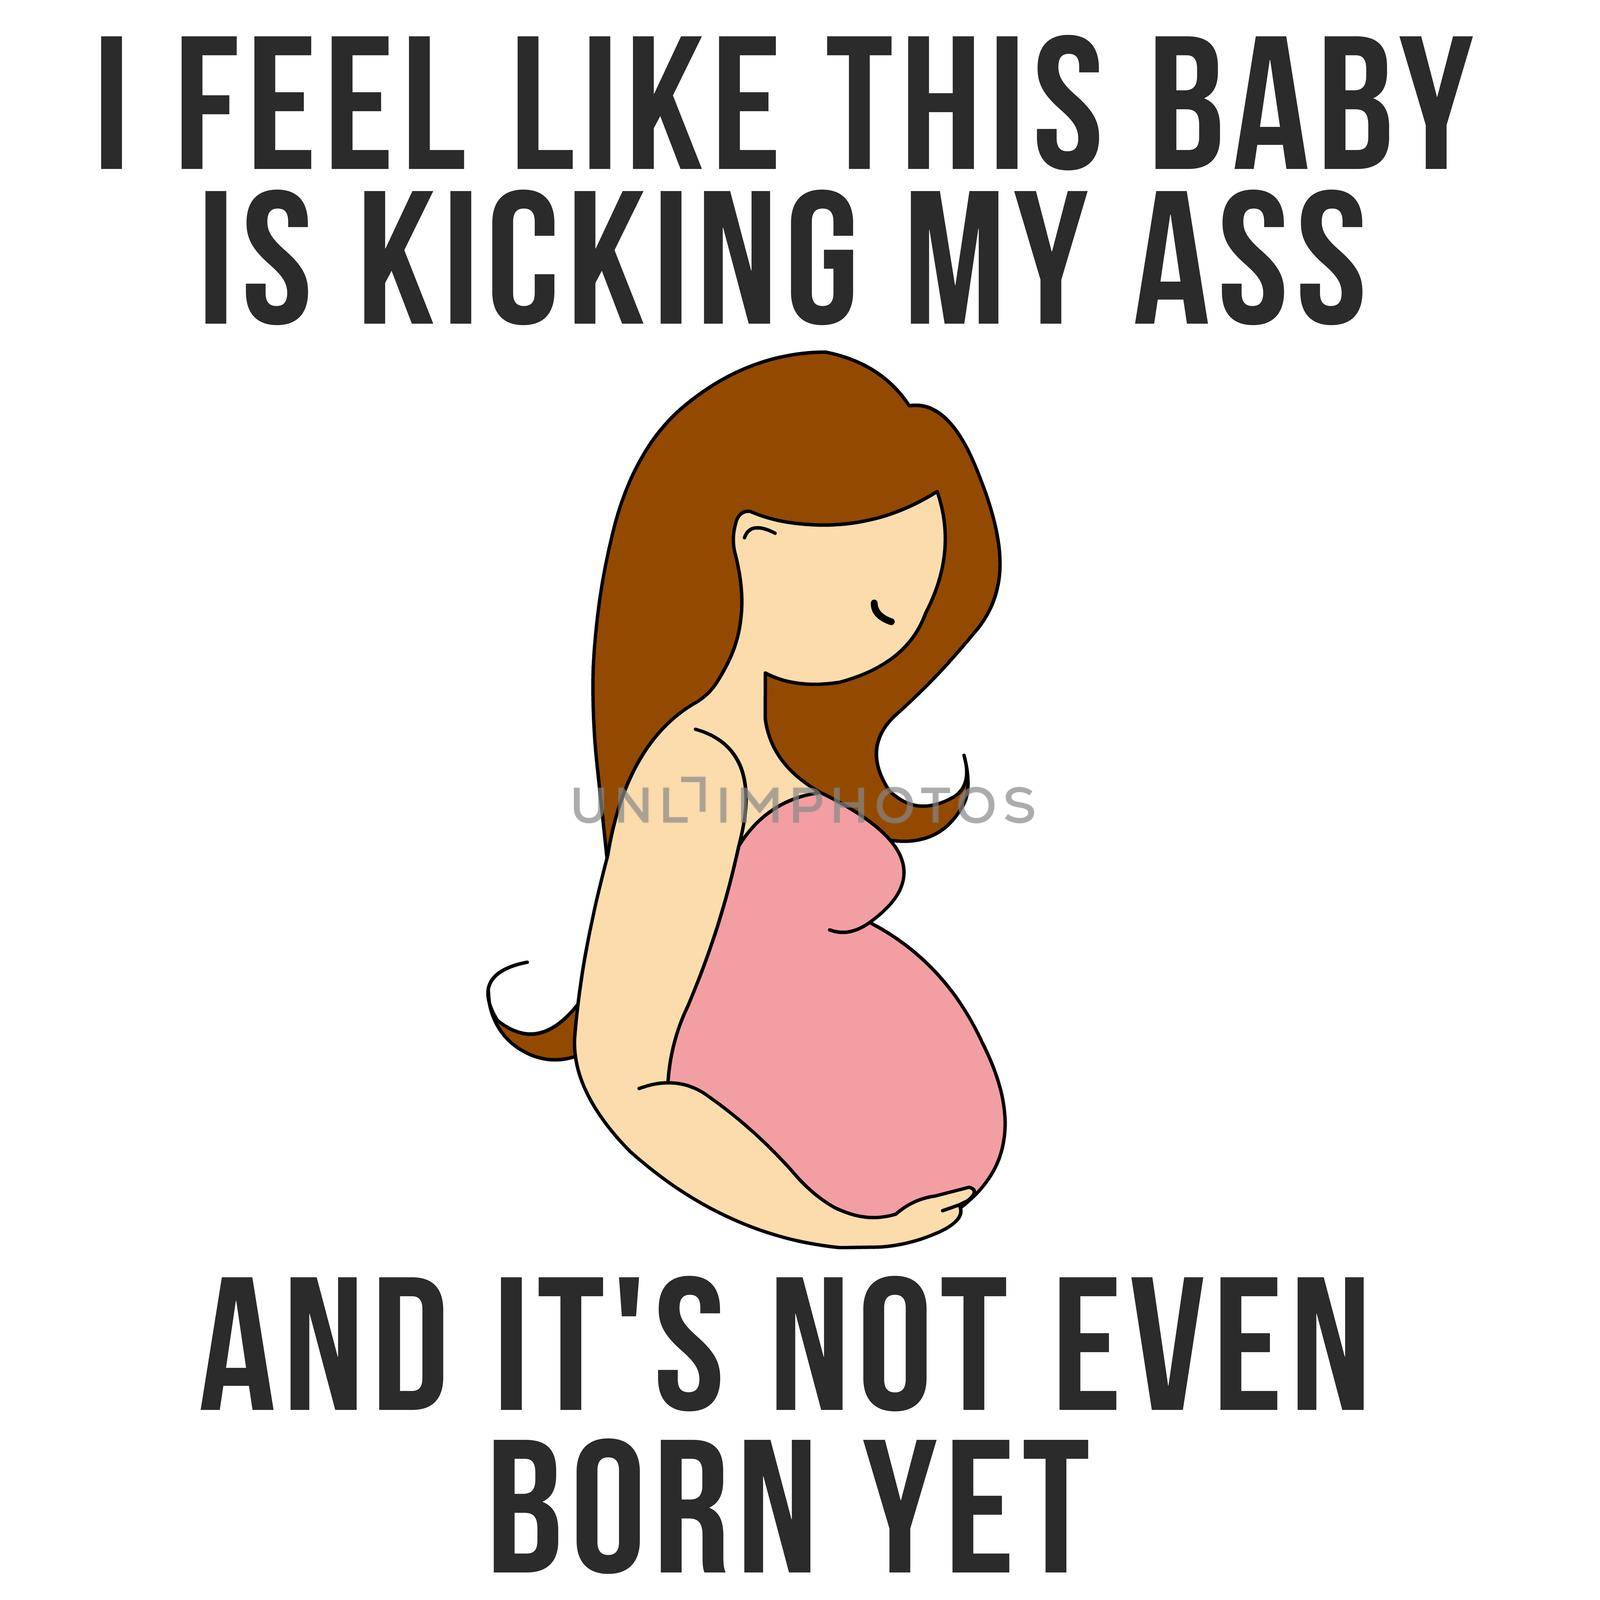 The feeling when pregnant